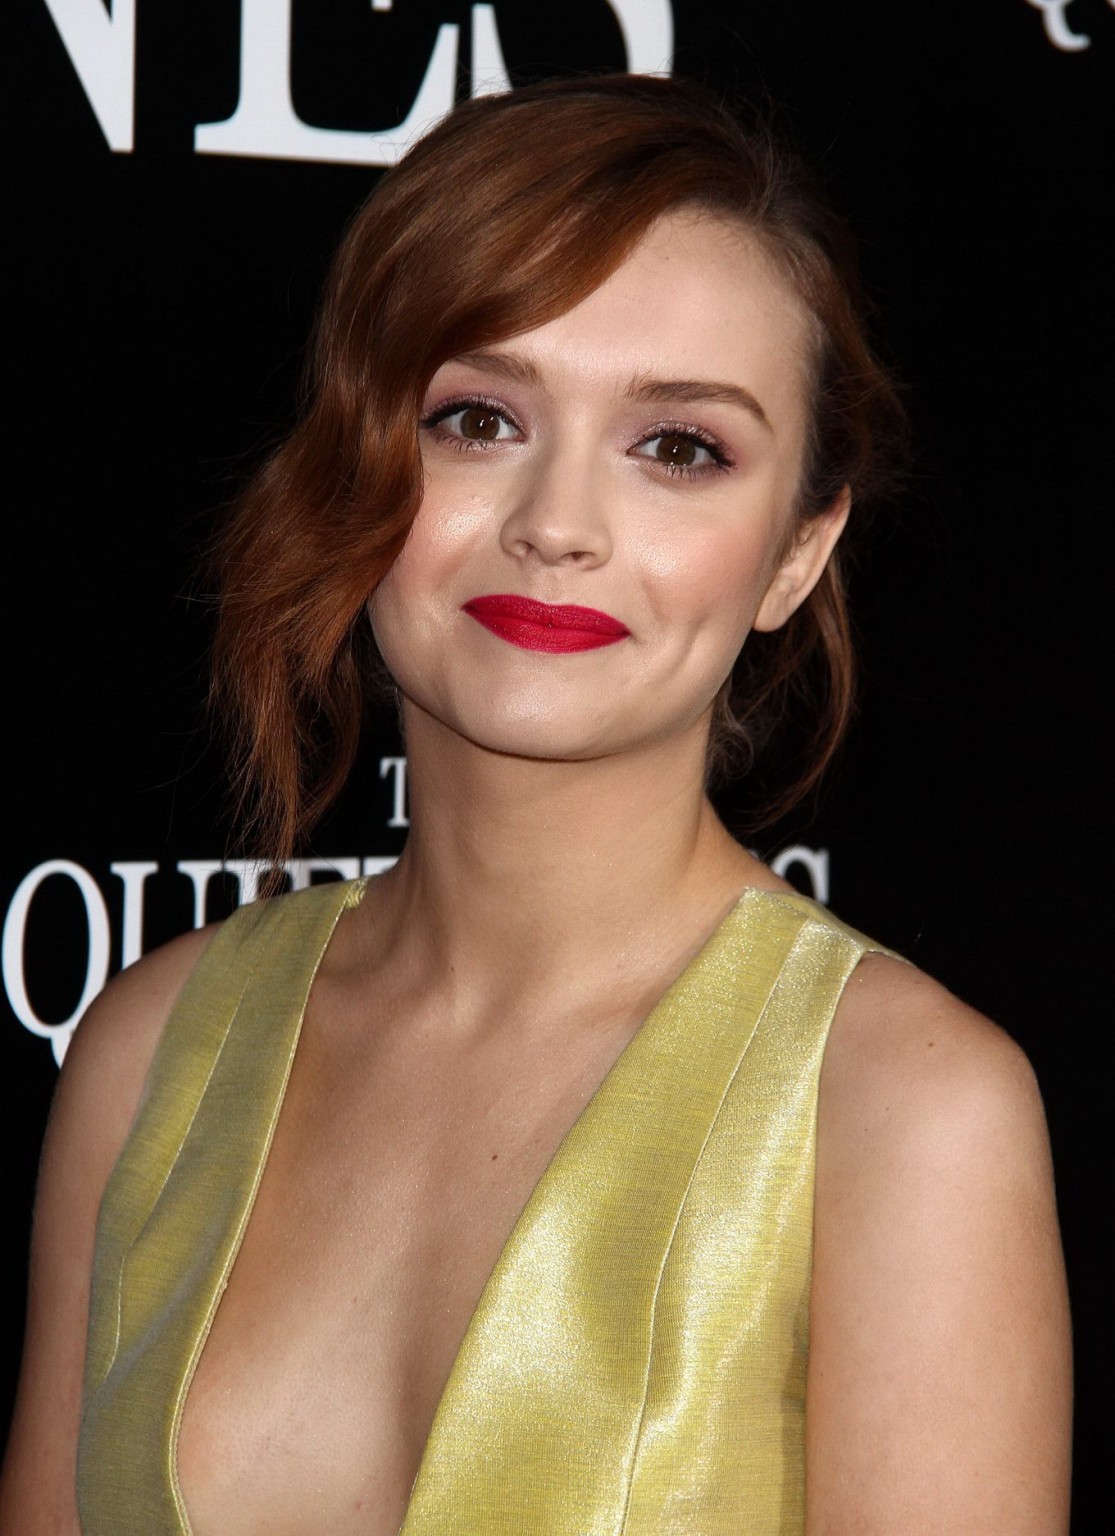 Olivia Cooke showing cleavage at The Quiet Ones premiere in LA #75197824